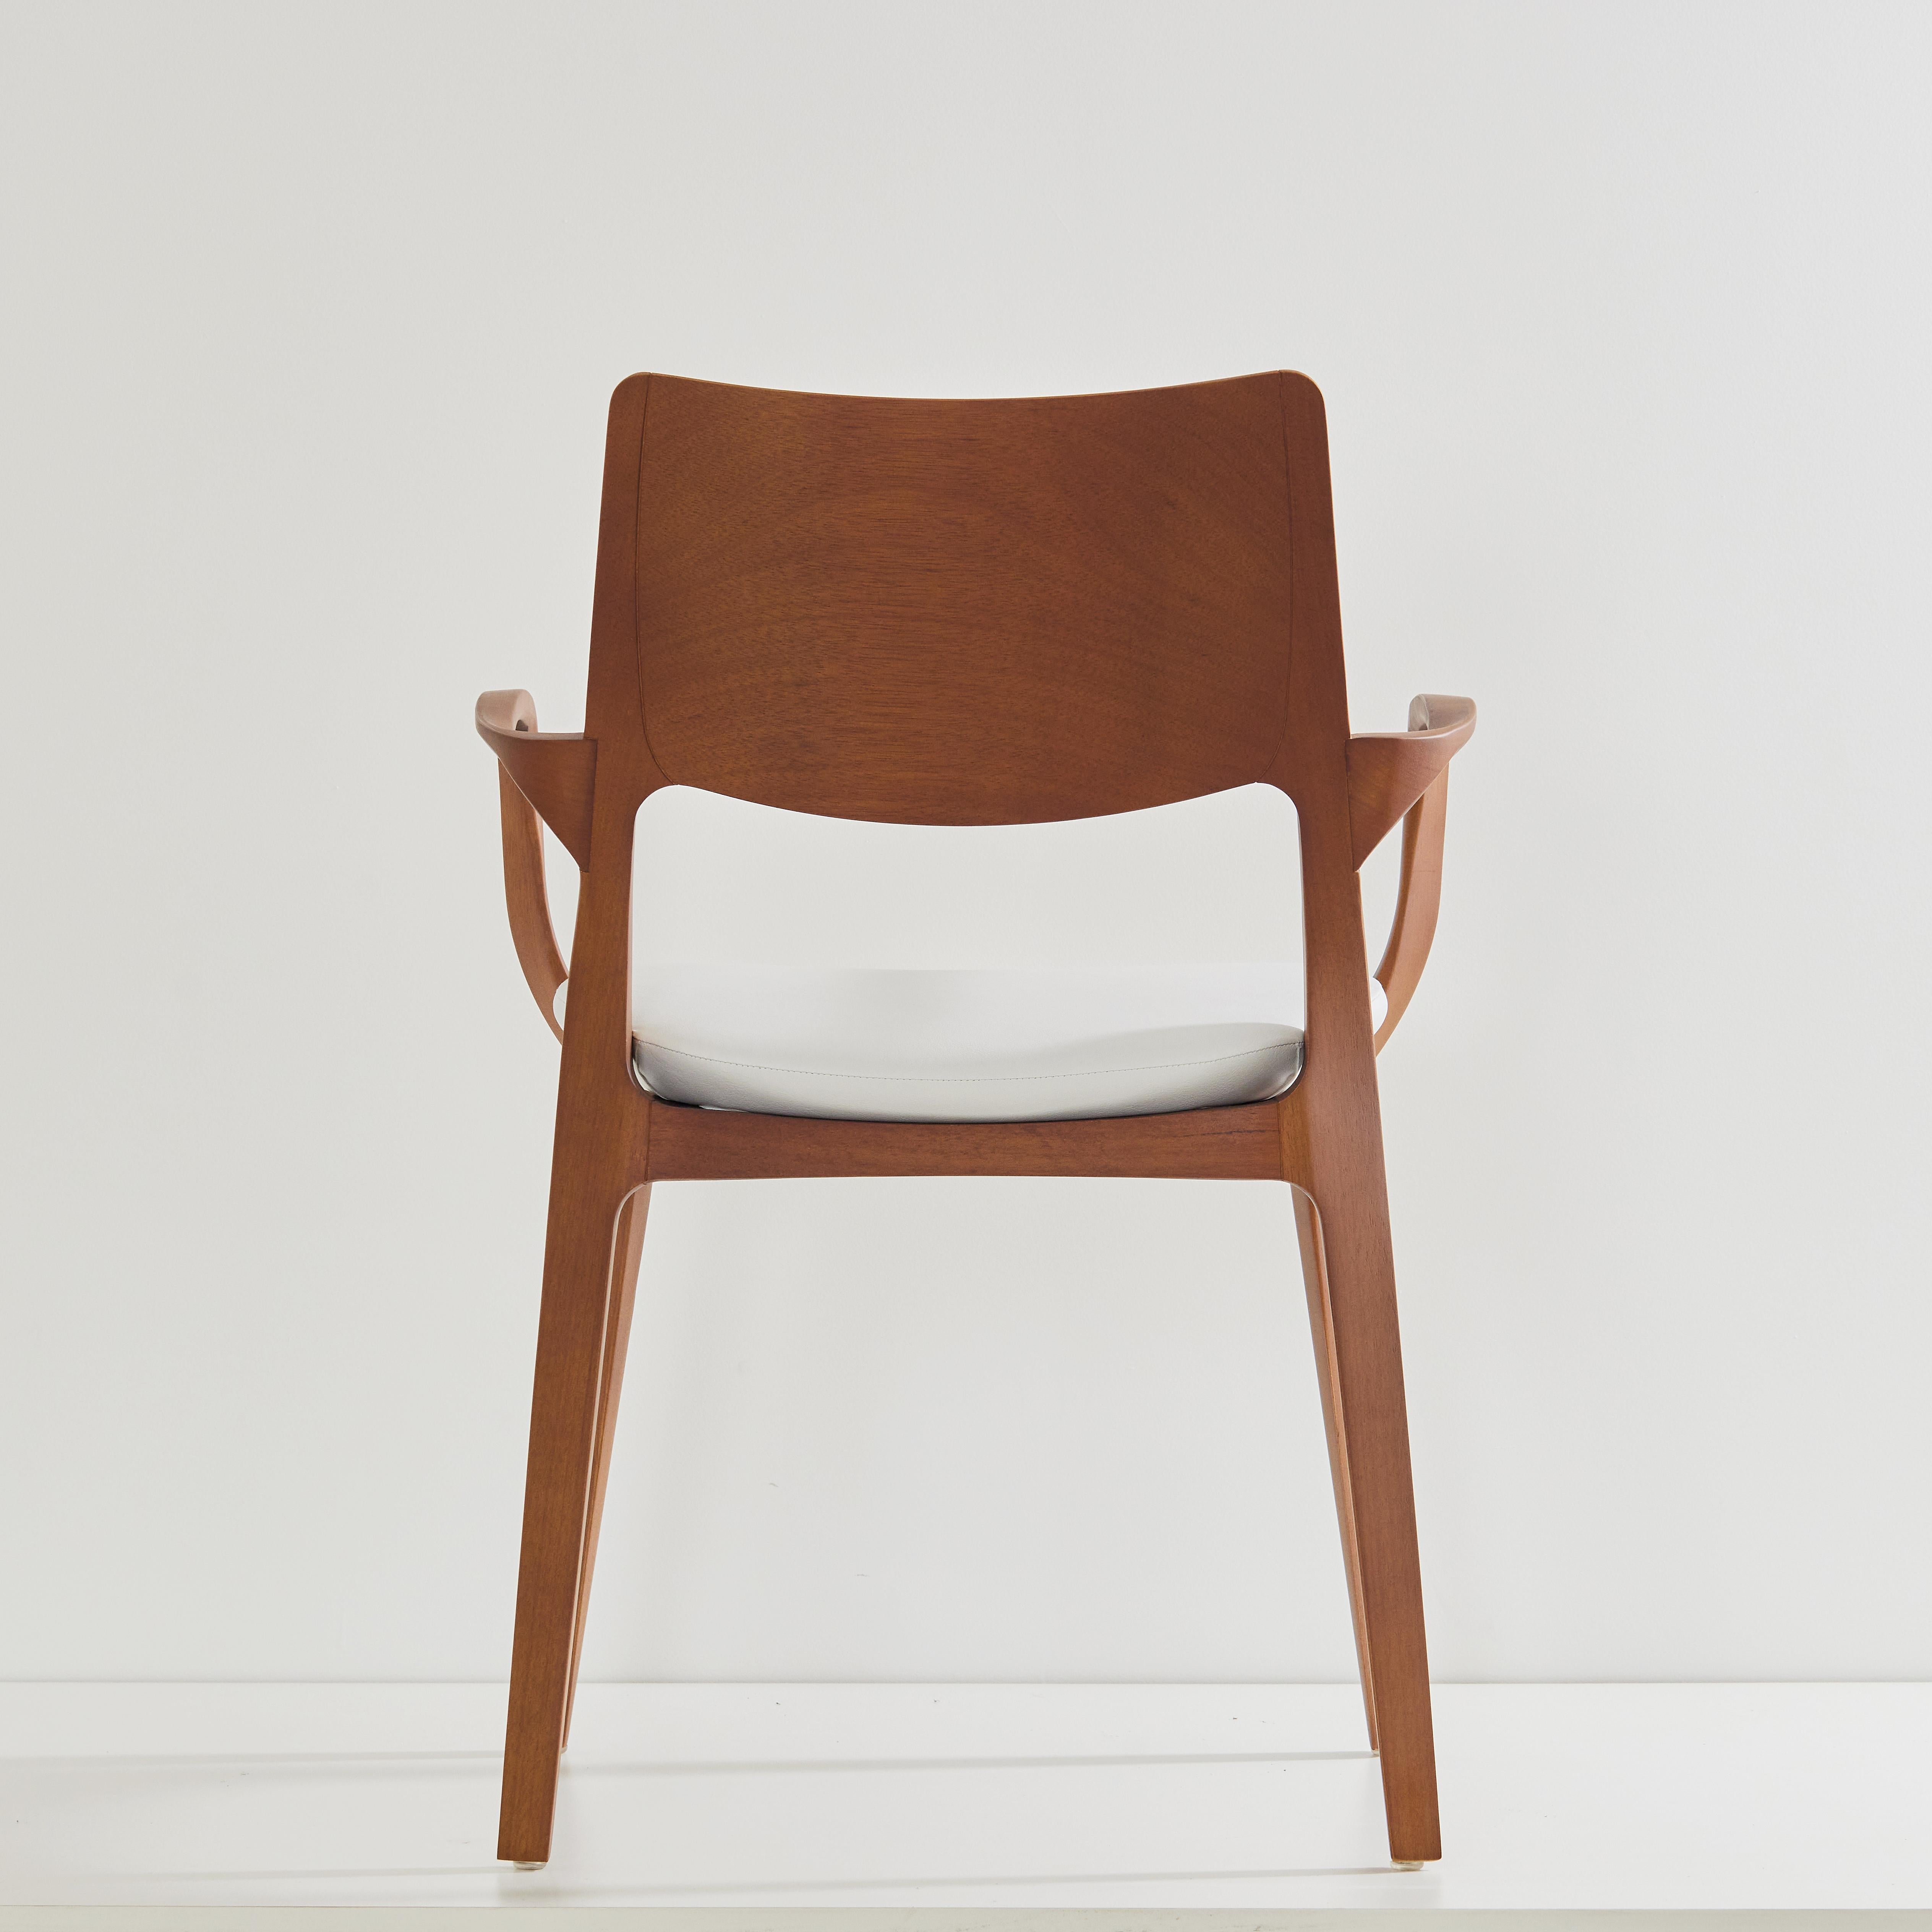 Contemporary Post-Modern Style Aurora Chair in honey solid wood, vegan leather seating For Sale